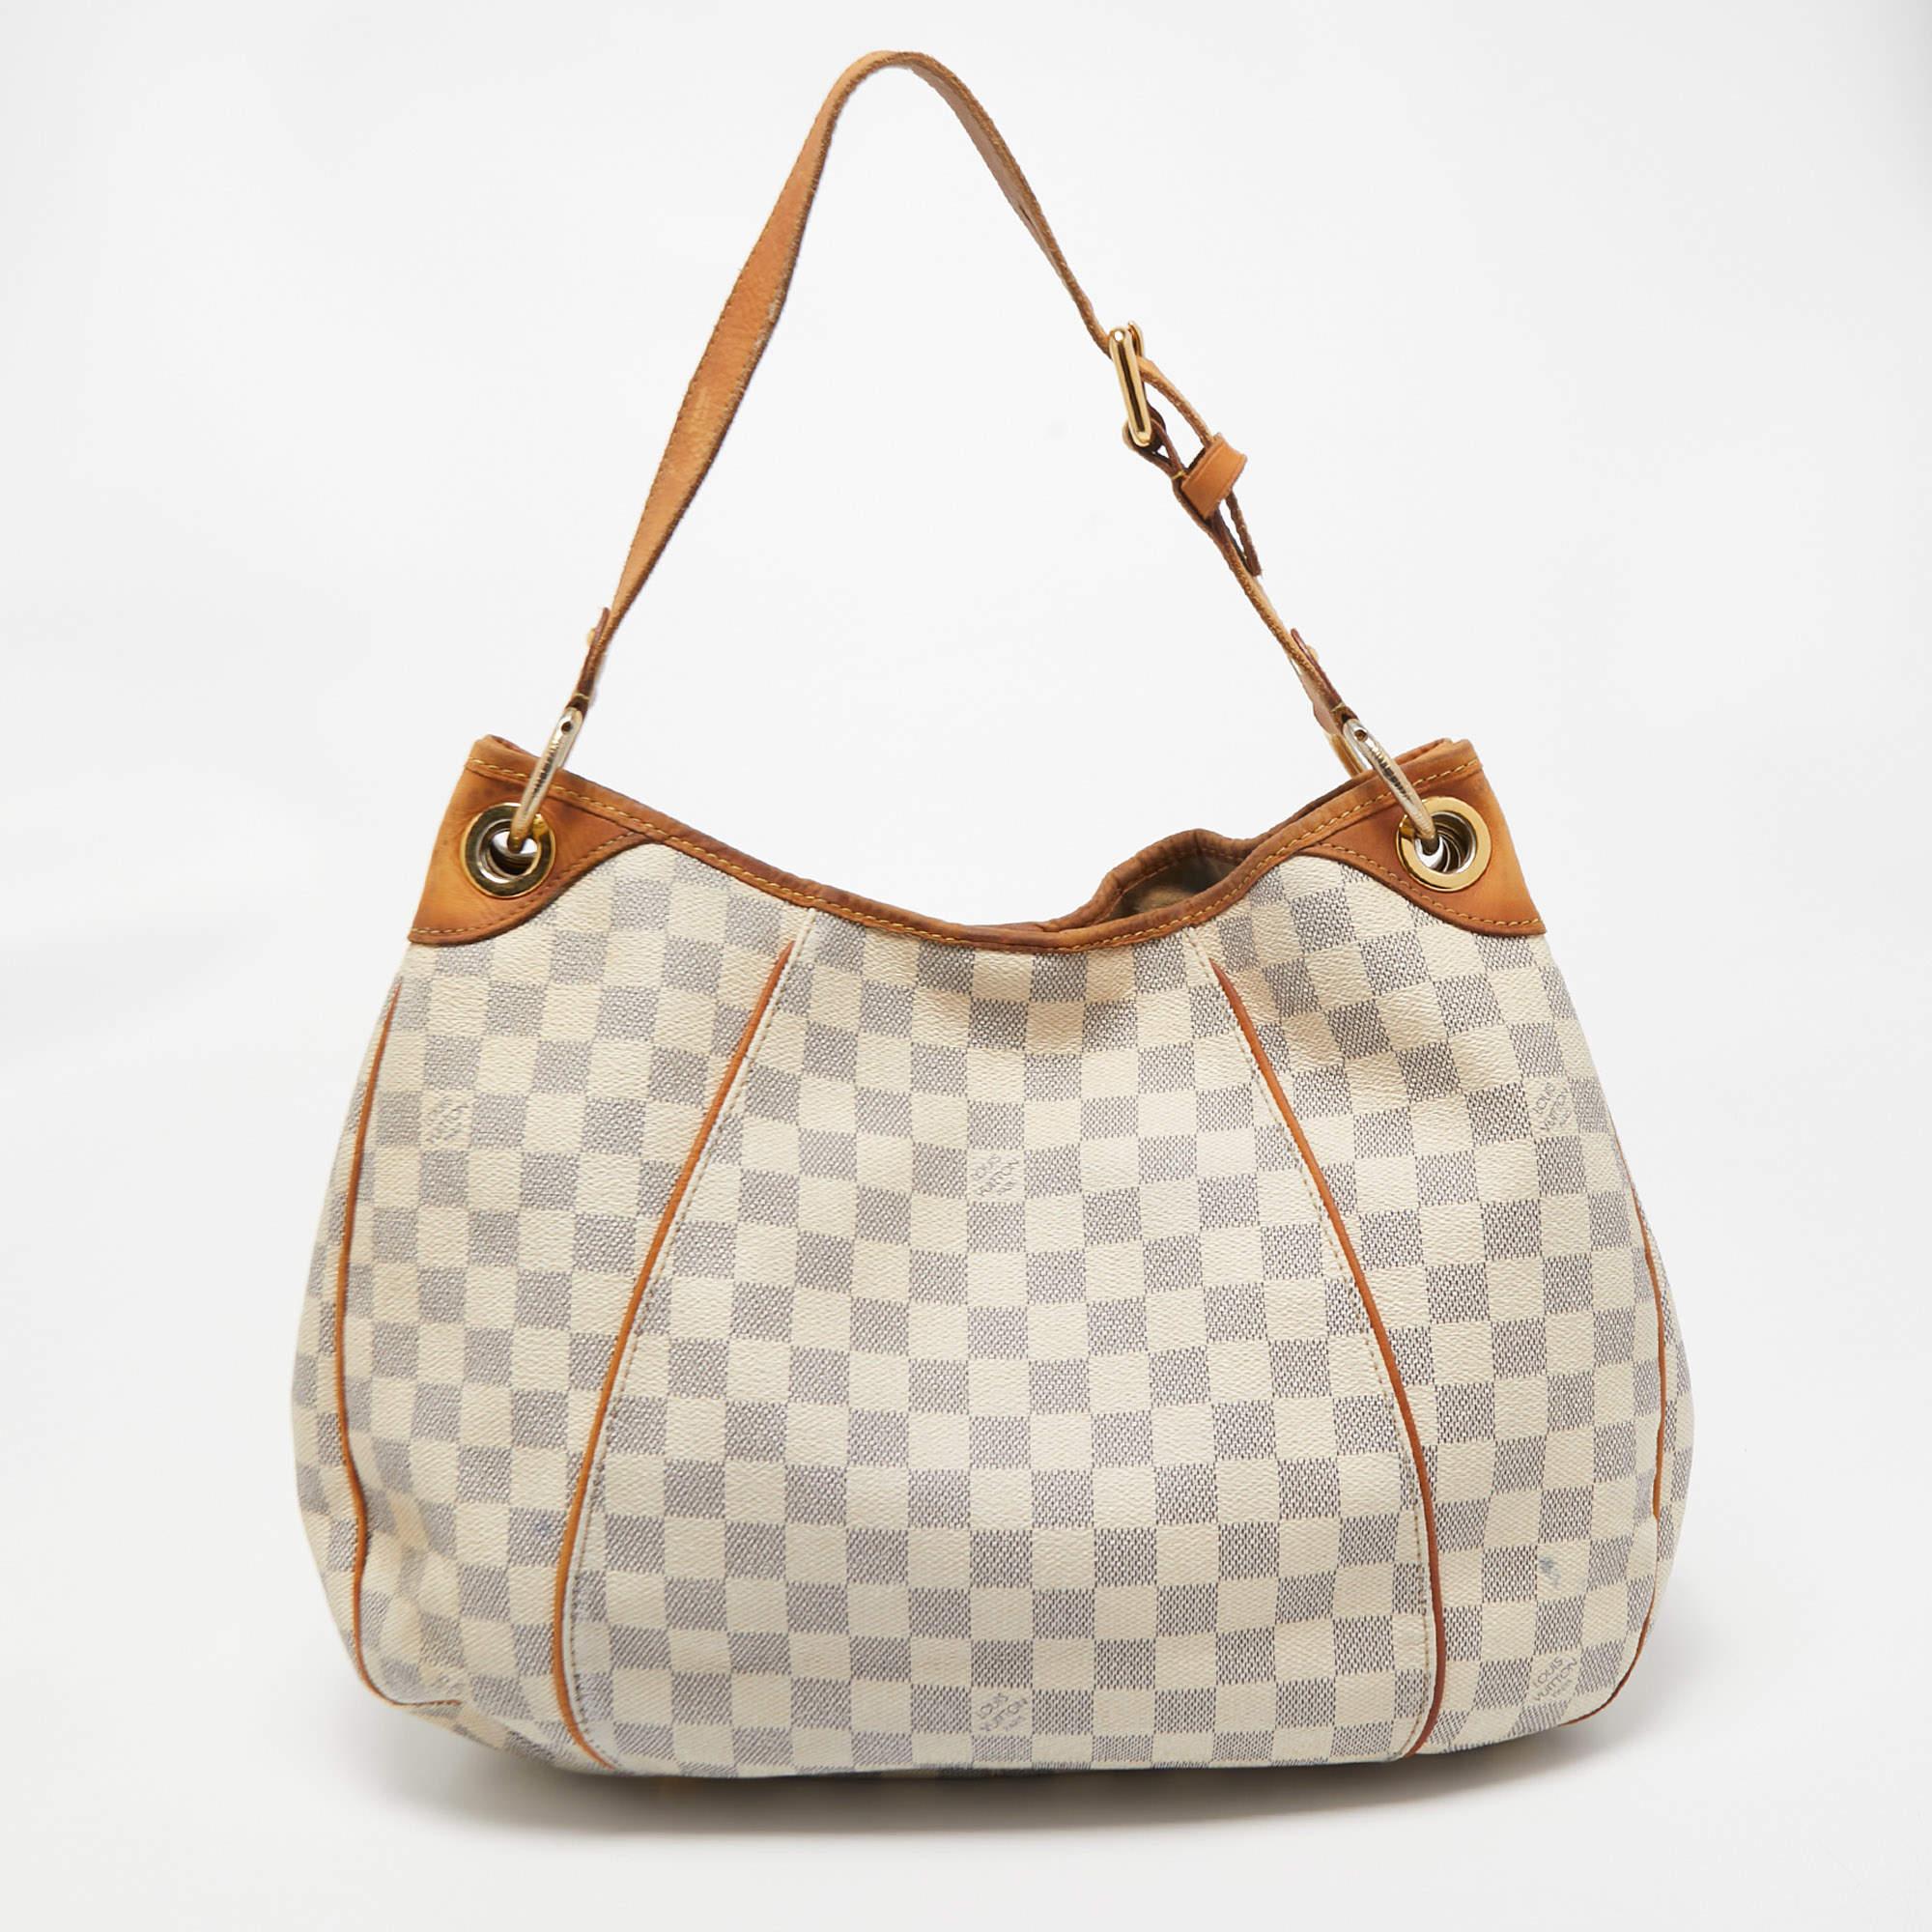 LOUIS VUITTON Galleria PM in Monogram Canvas - More Than You Can Imagine